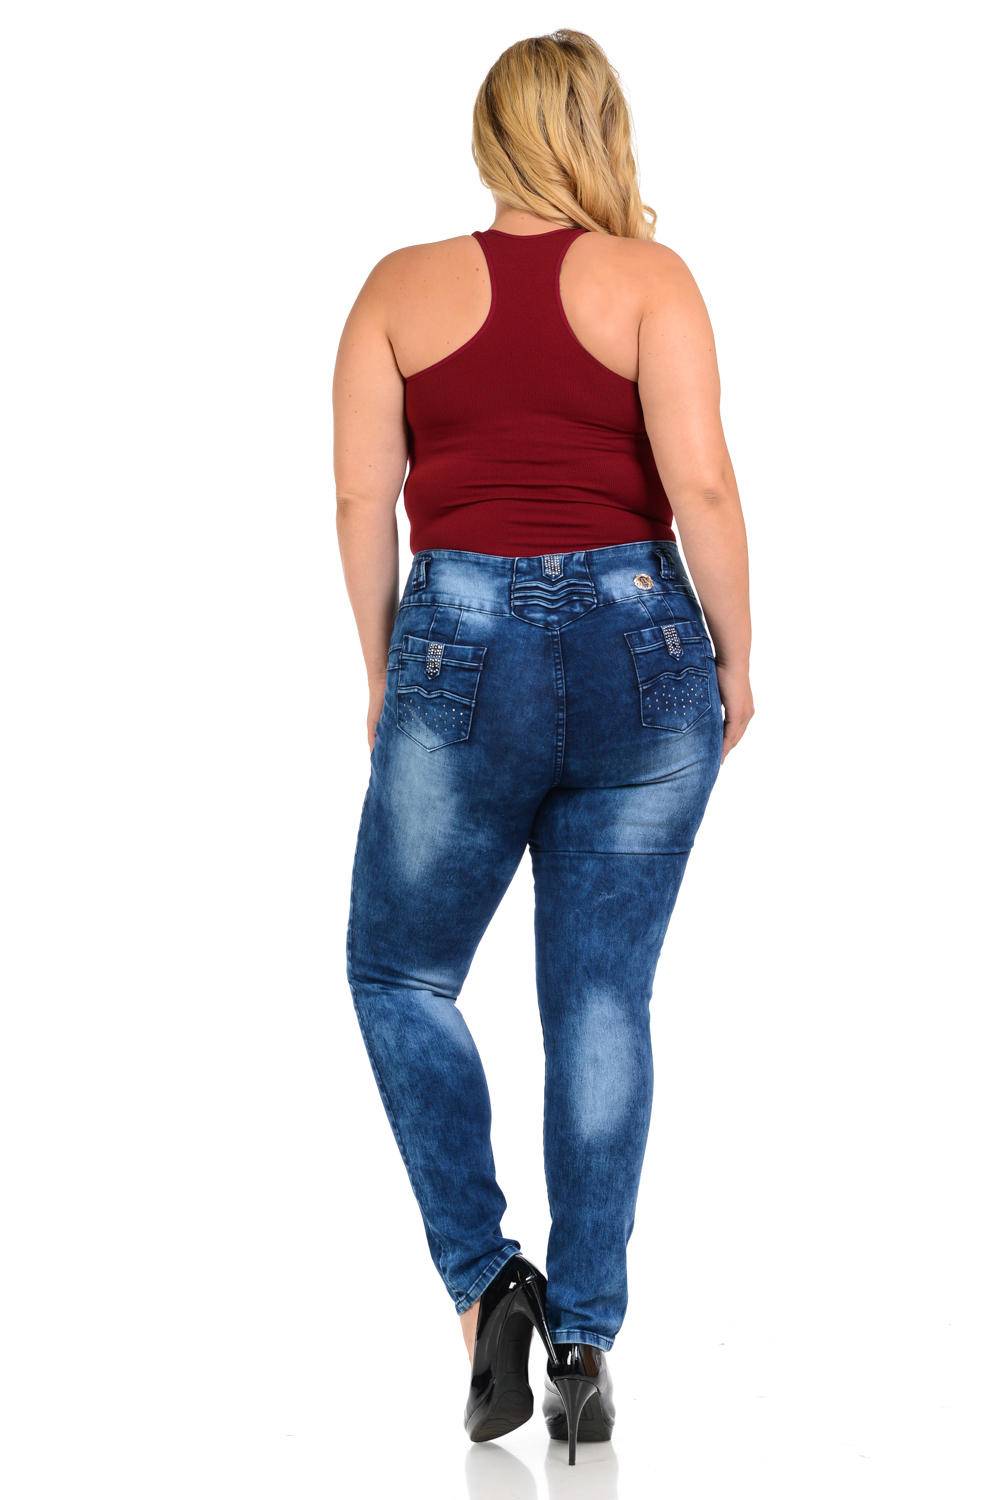 High waisted boyfriend jeans plus size clothing